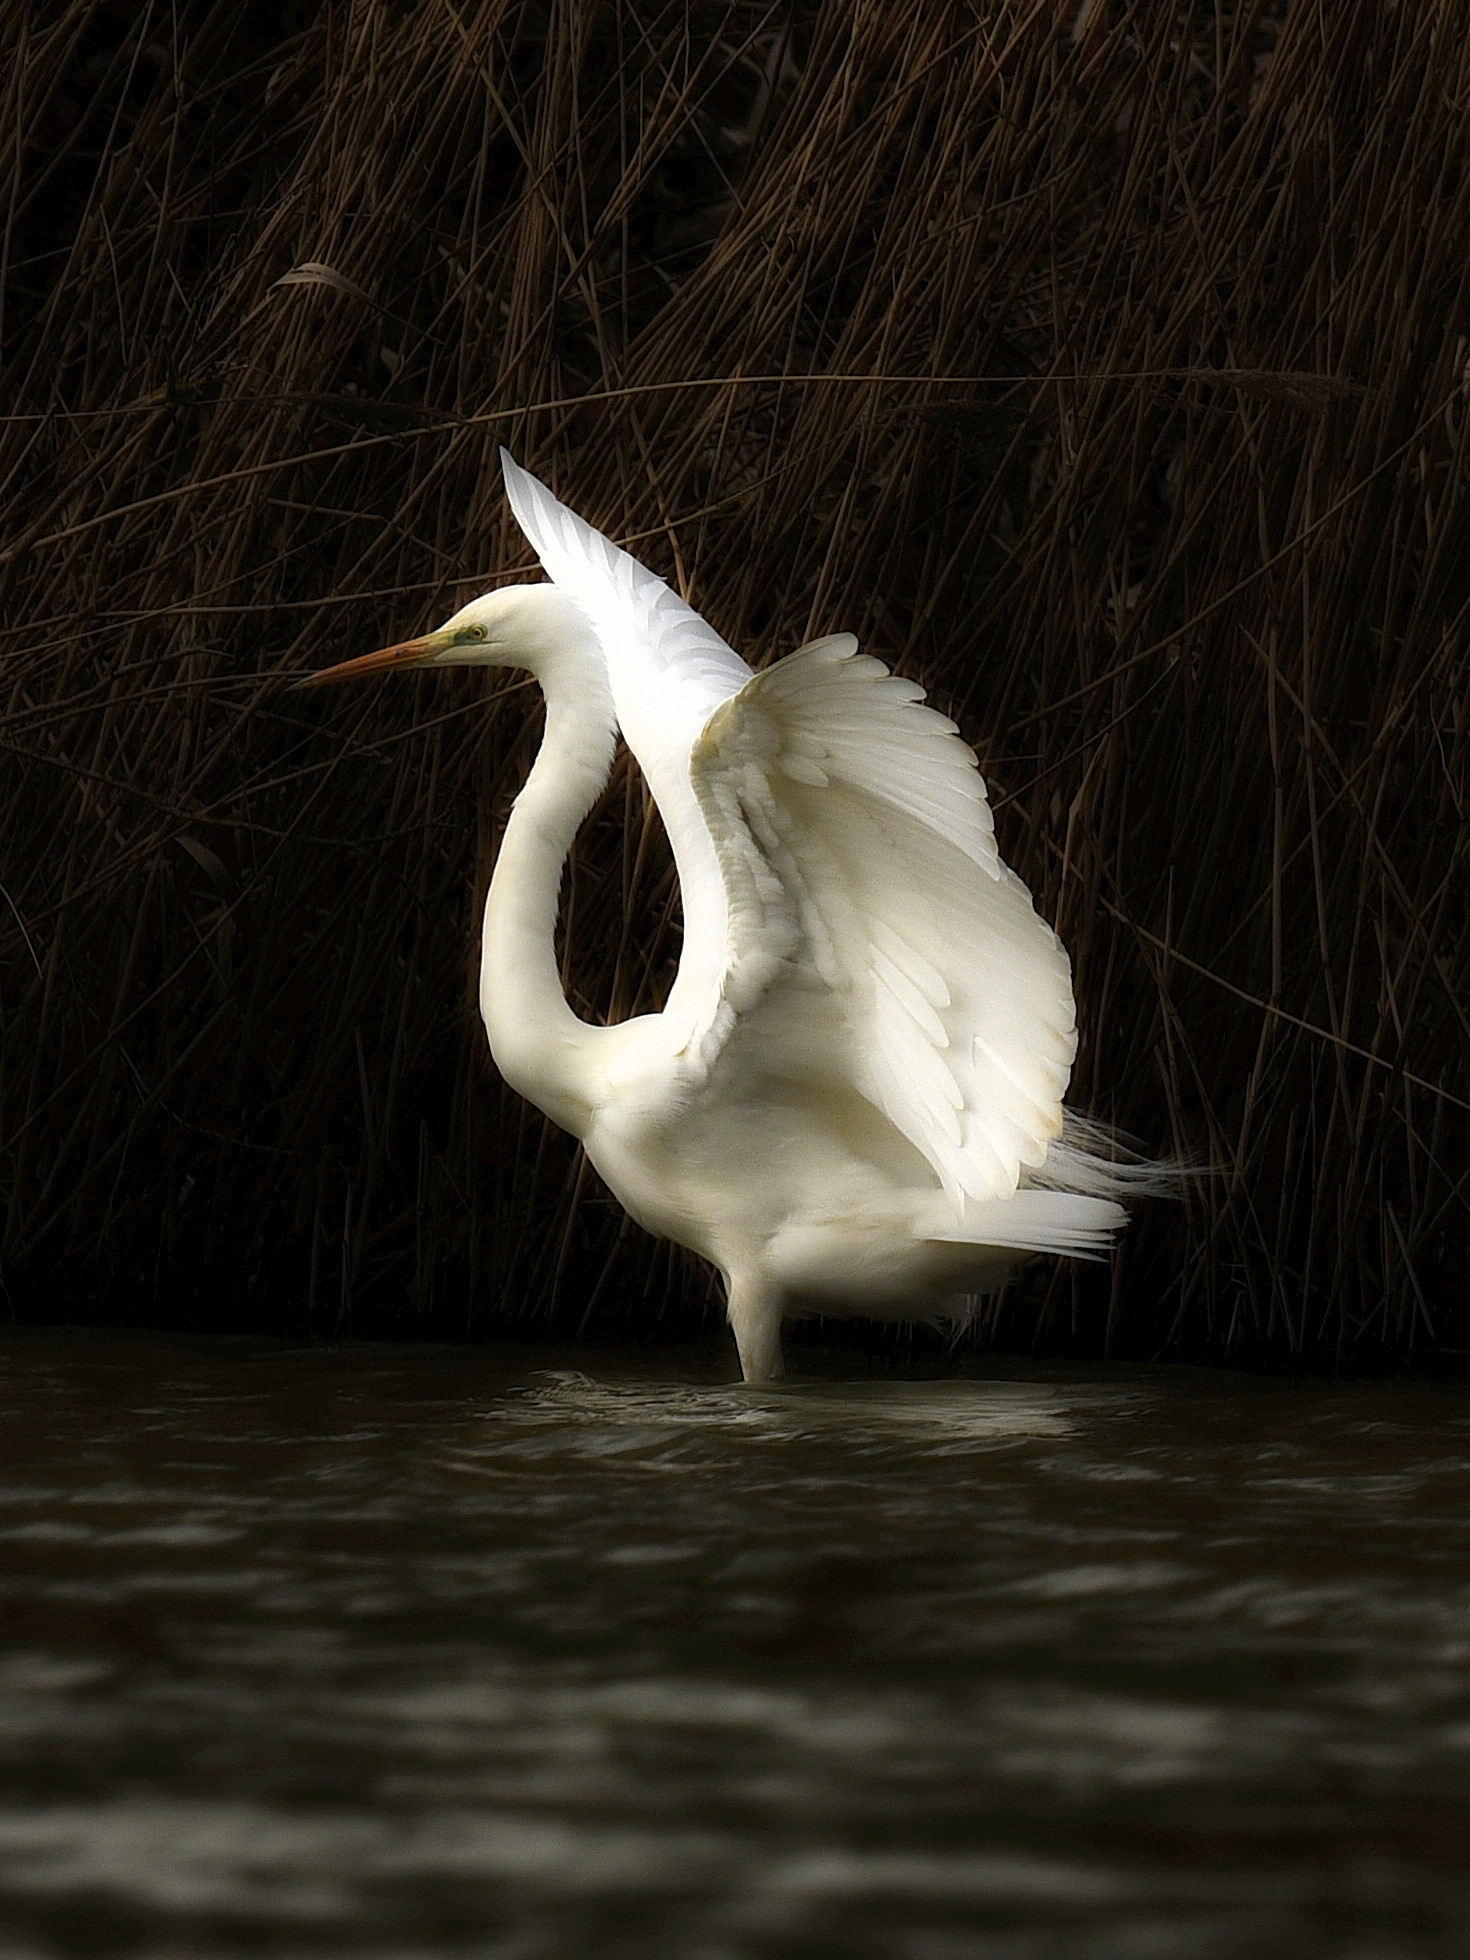 A shot fished out from 2020, White Heron...